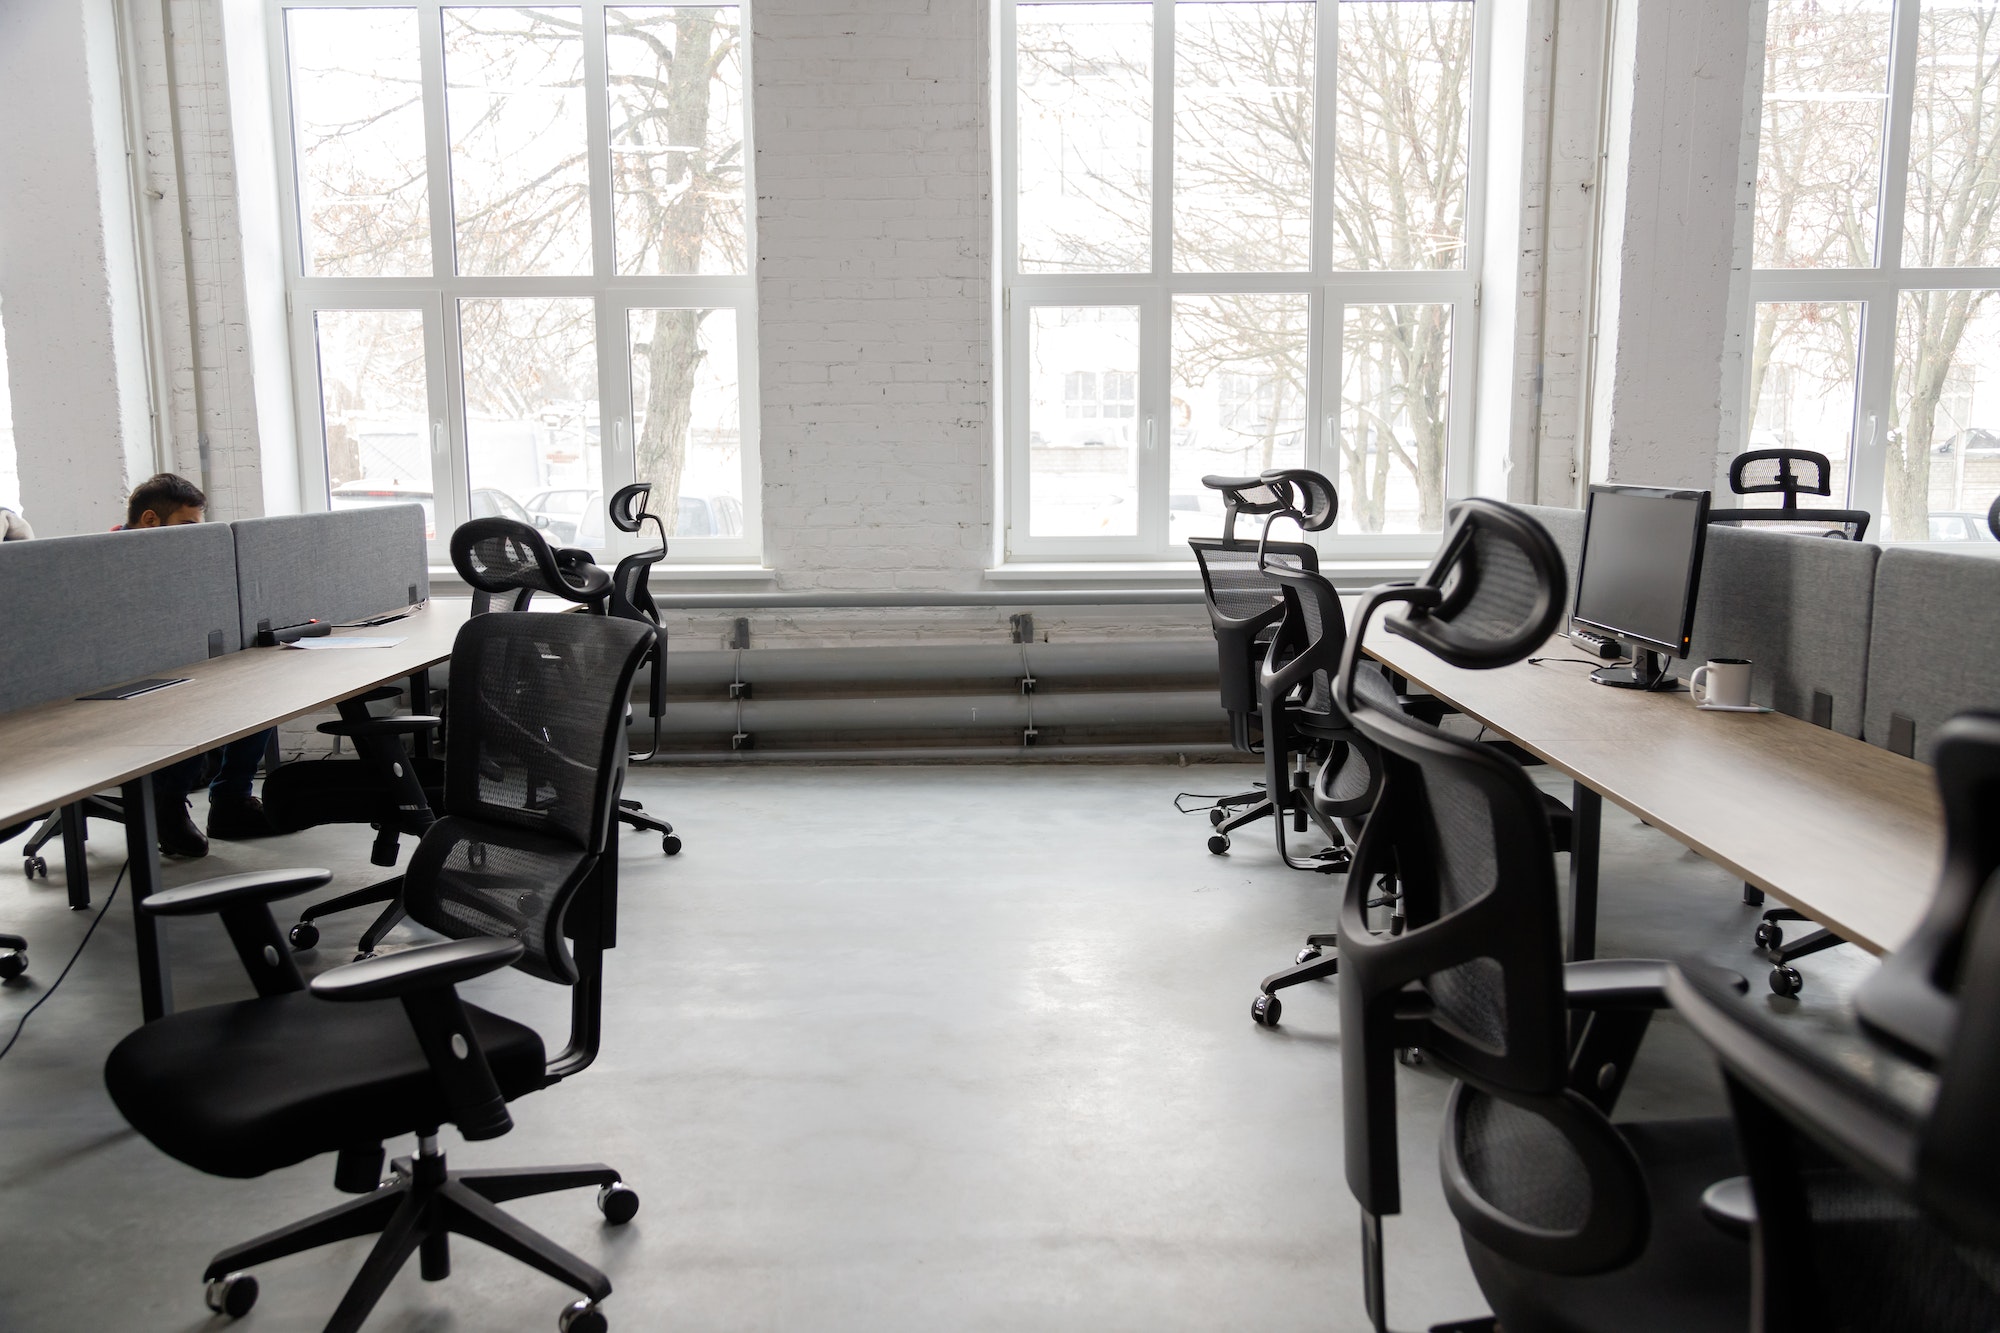 Interior of modern coworking space without people, containing tables and chairs